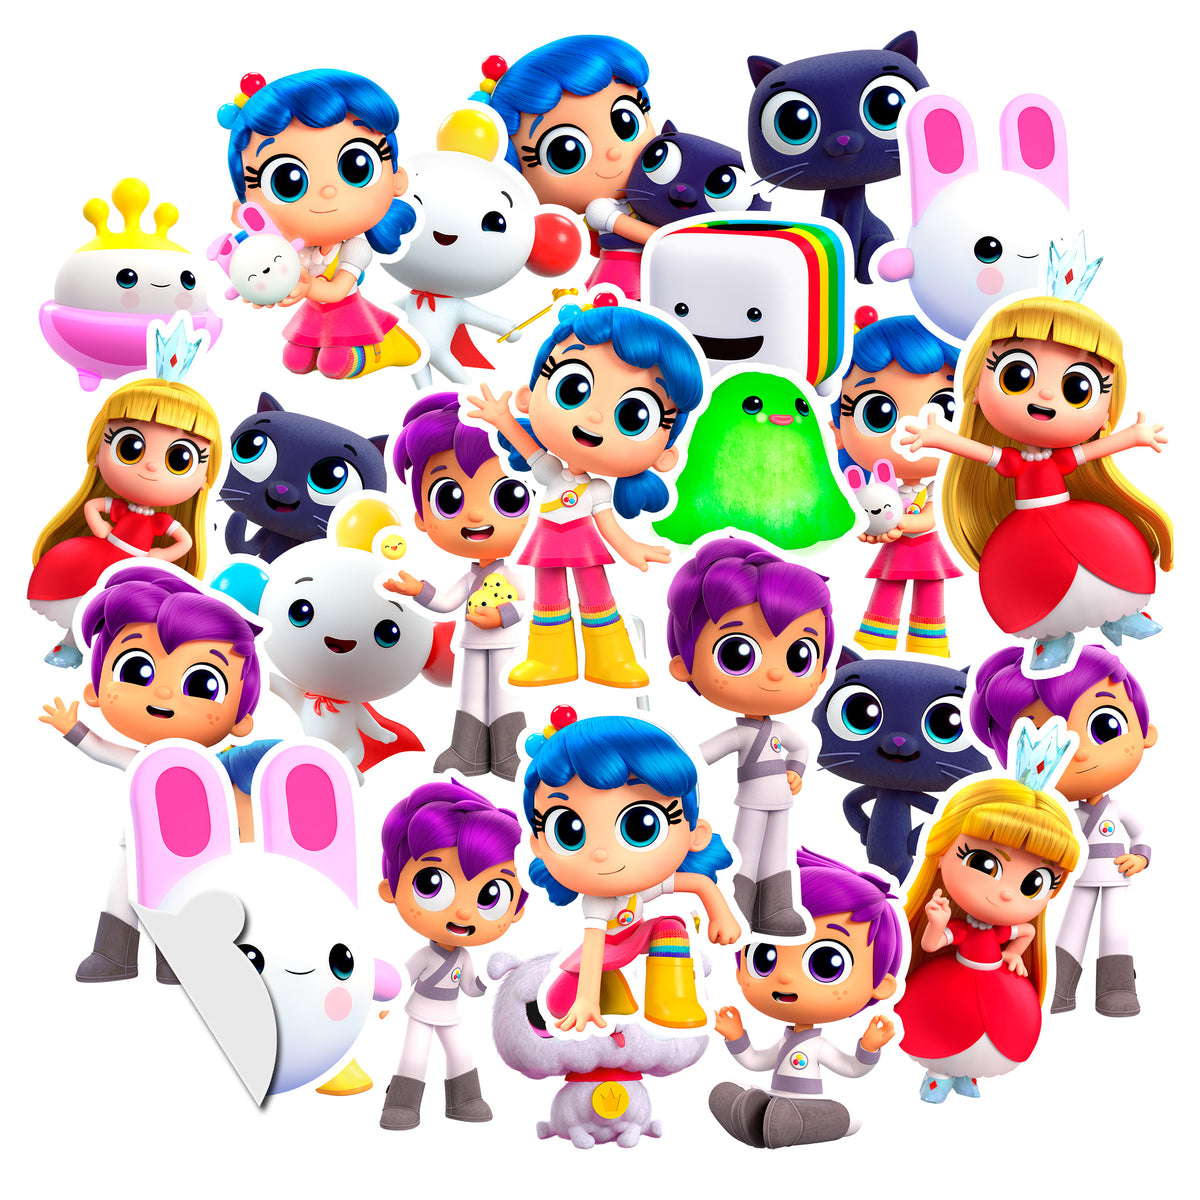 25 Pcs True and the Rainbow Kingdom Vinyl Stickers - Perfect for Fans to Decorate and Express!